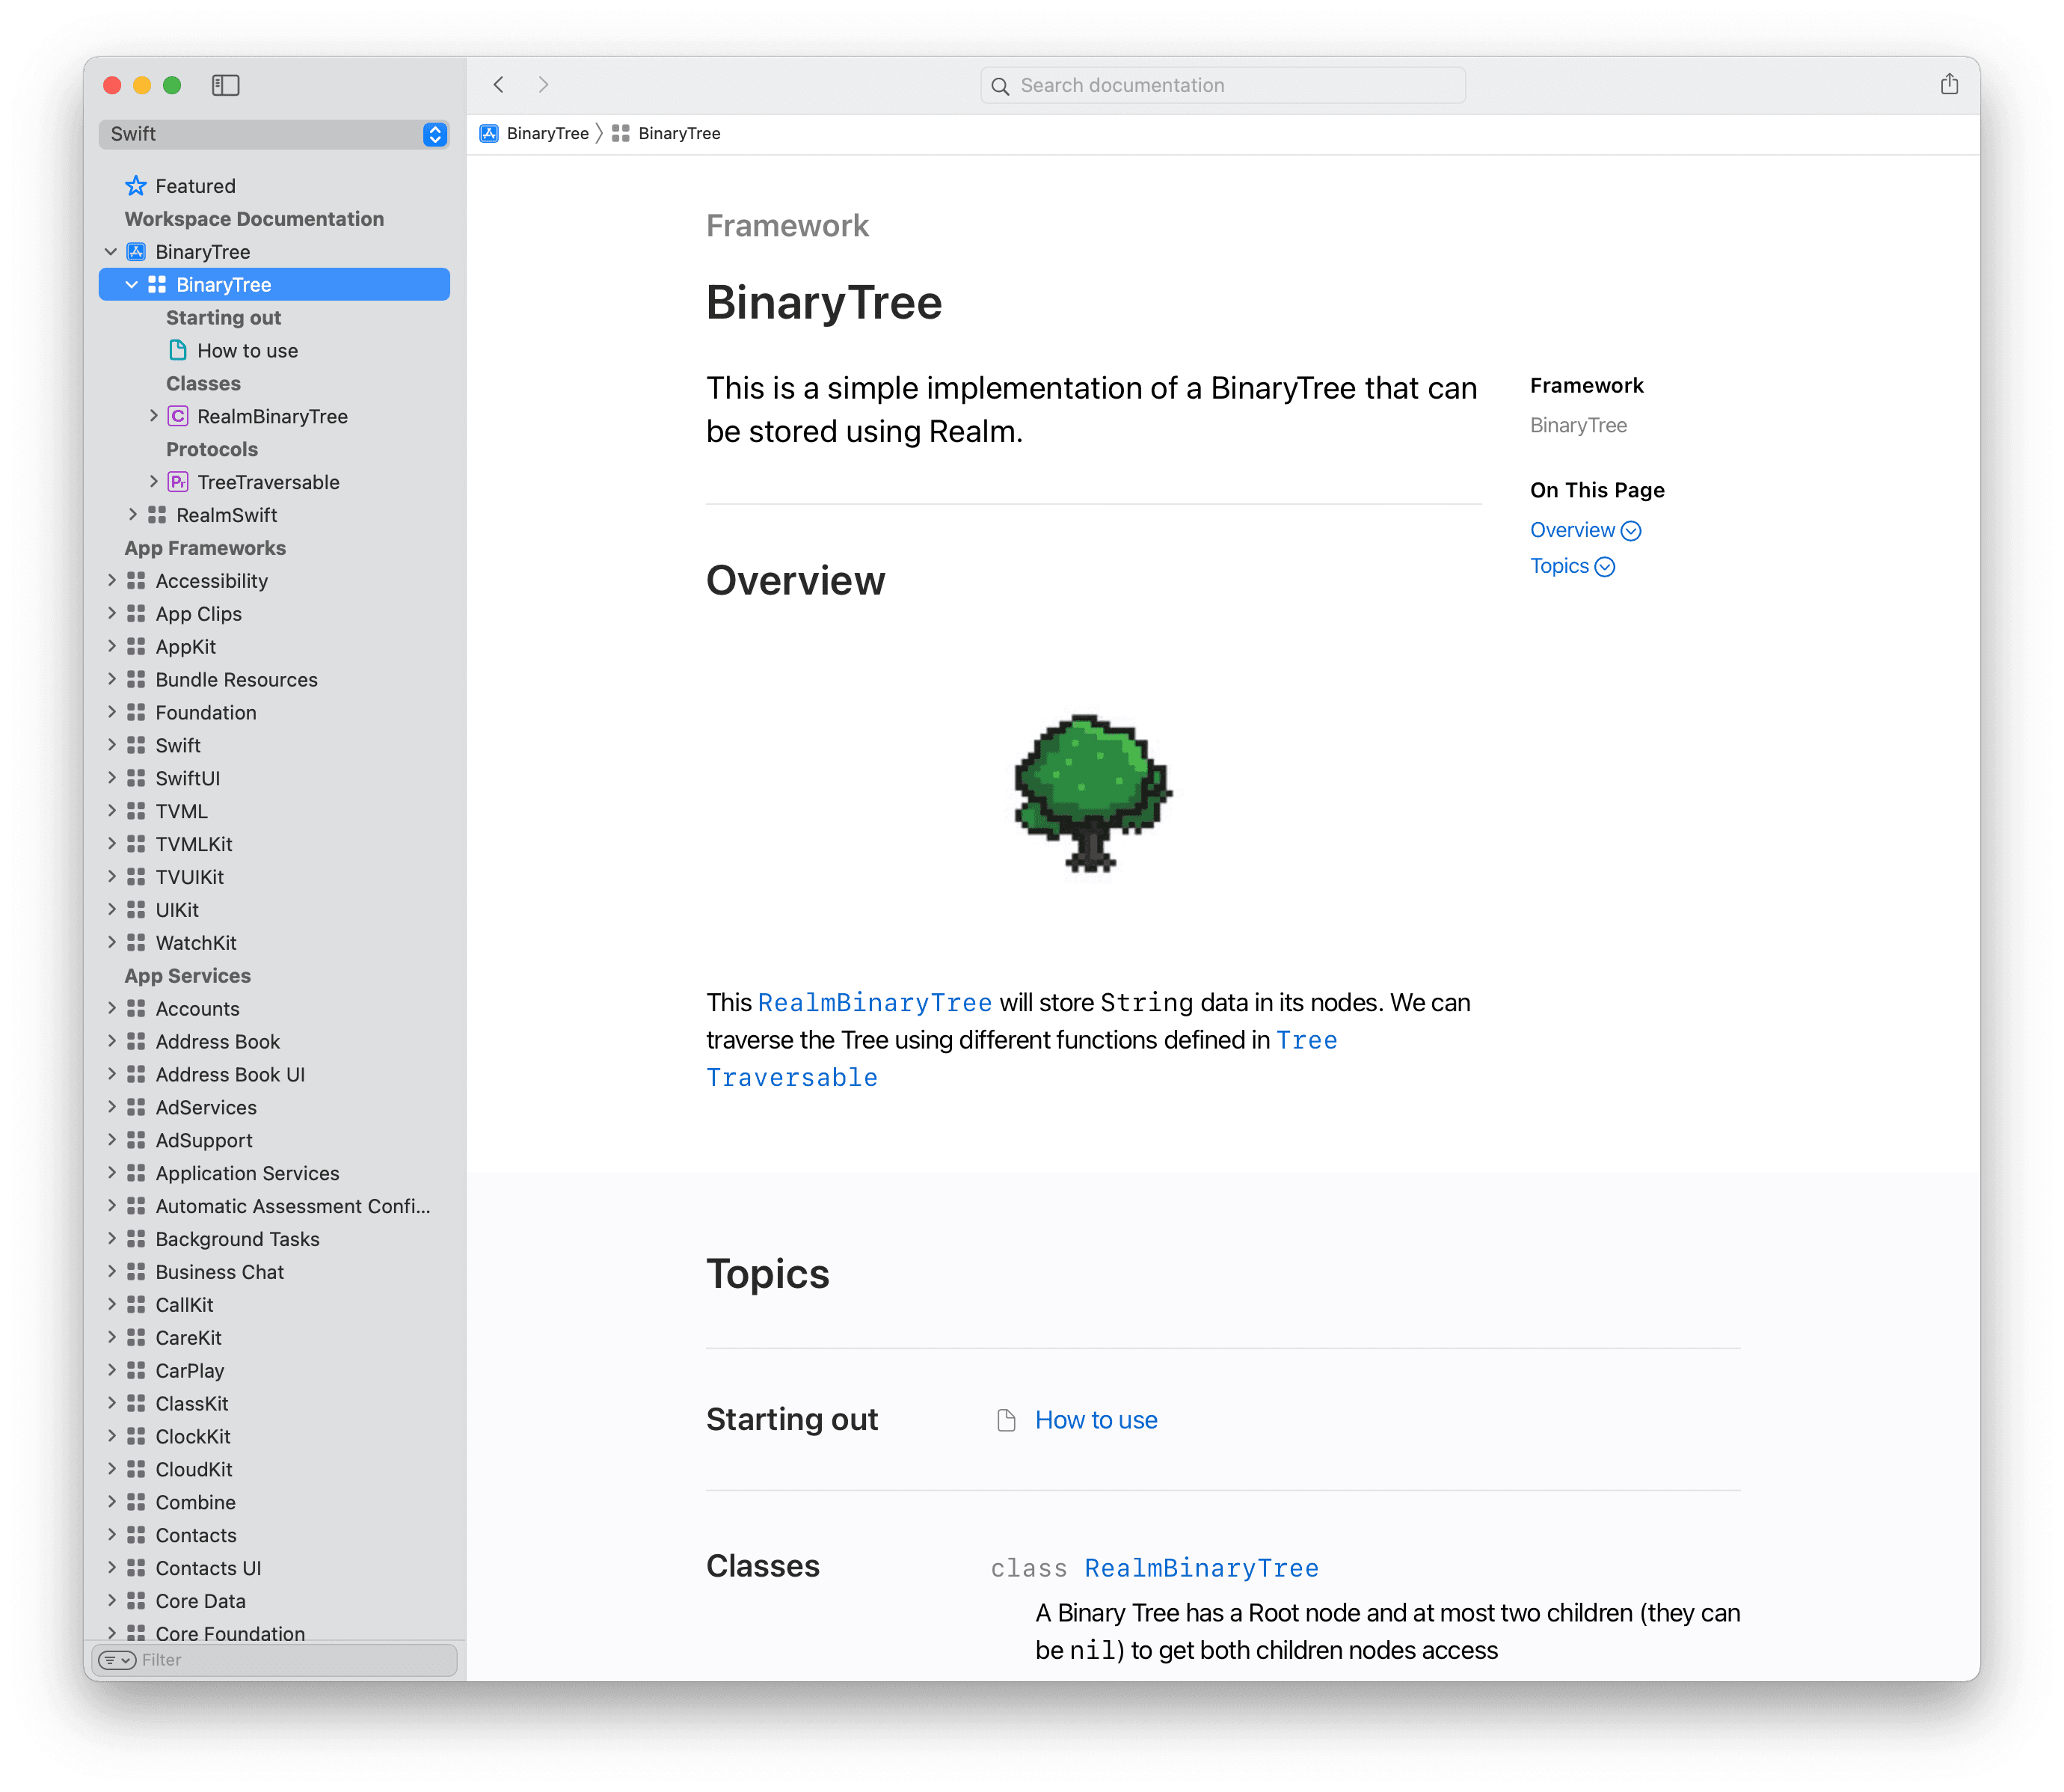 Documentation Browser showing the BinaryTree main page with an image of a tree, in pixel art style